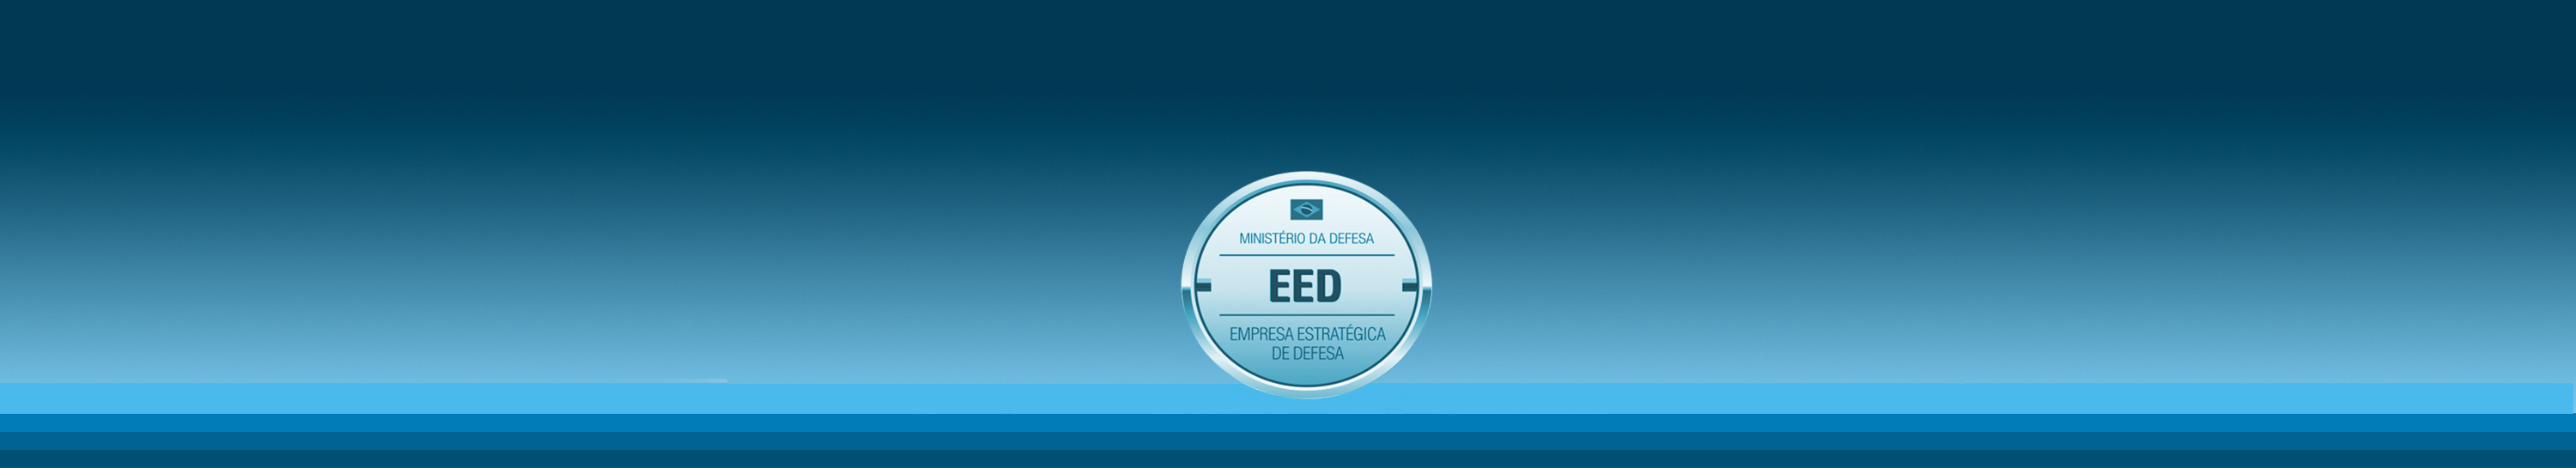 http://www.ctcea.org.br/wp-content/uploads/2019/12/banner_eed-3.jpg